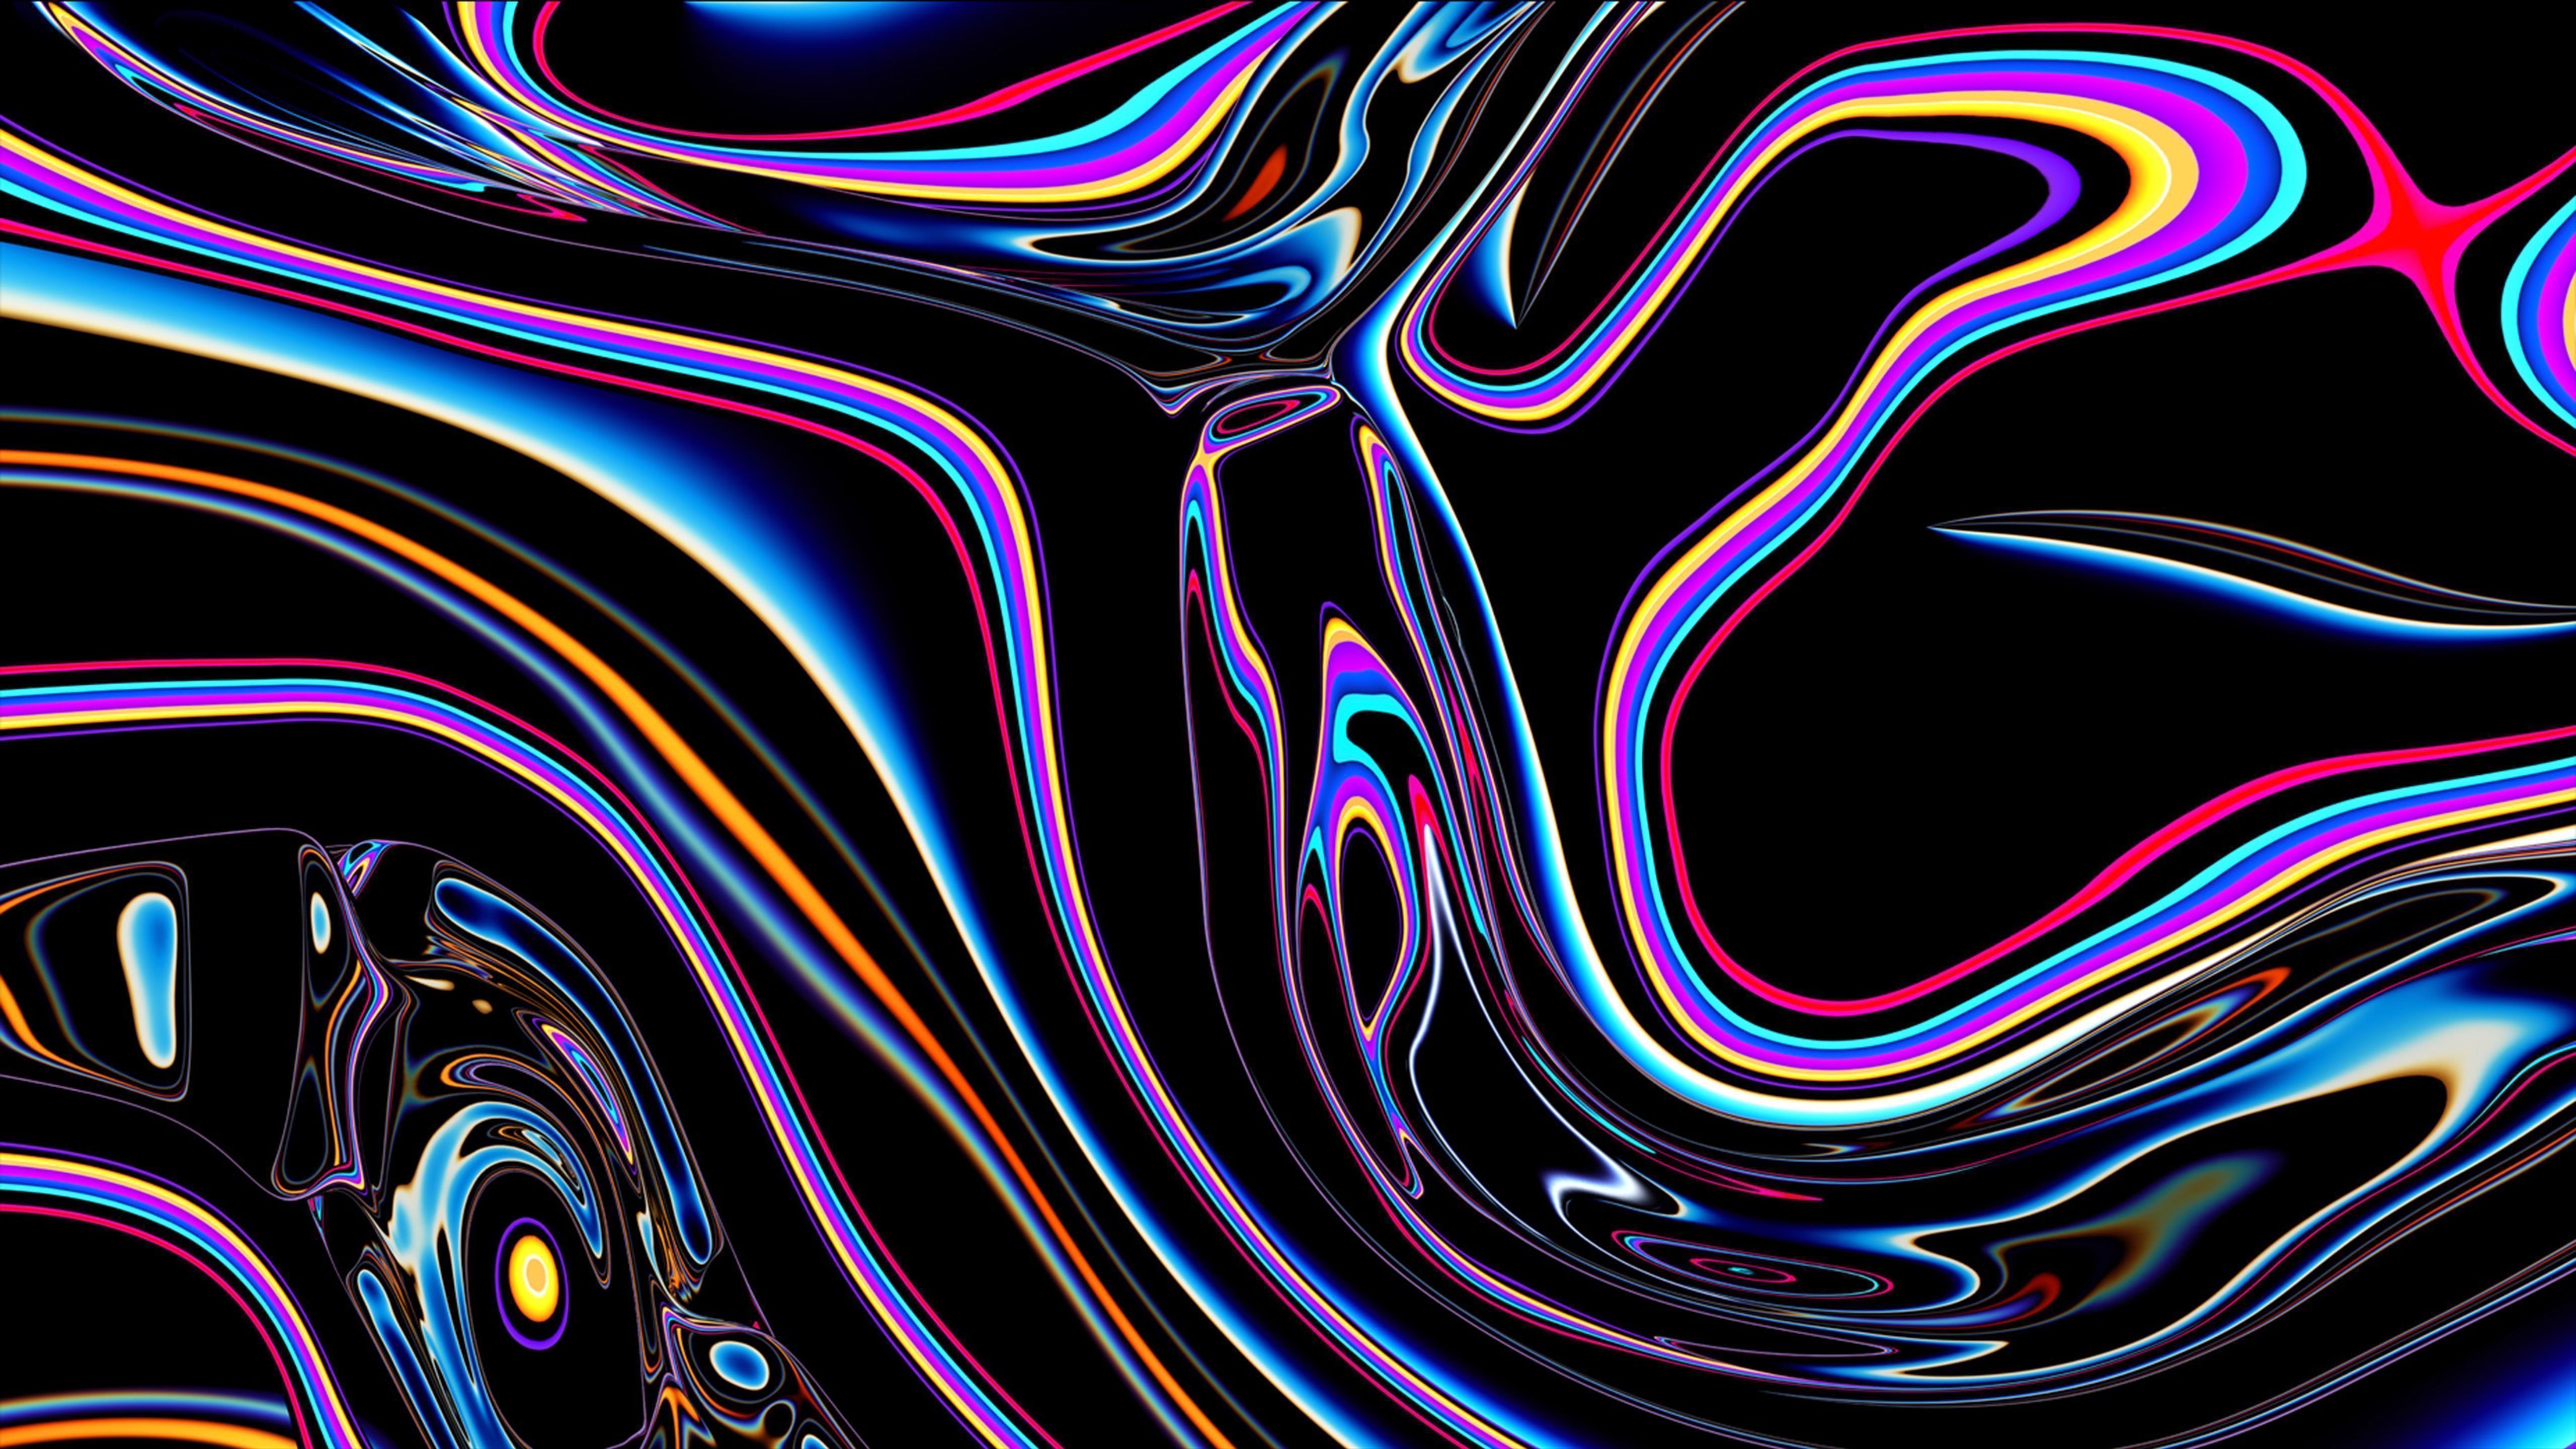 A colorful abstract design with swirling lines - MacBook